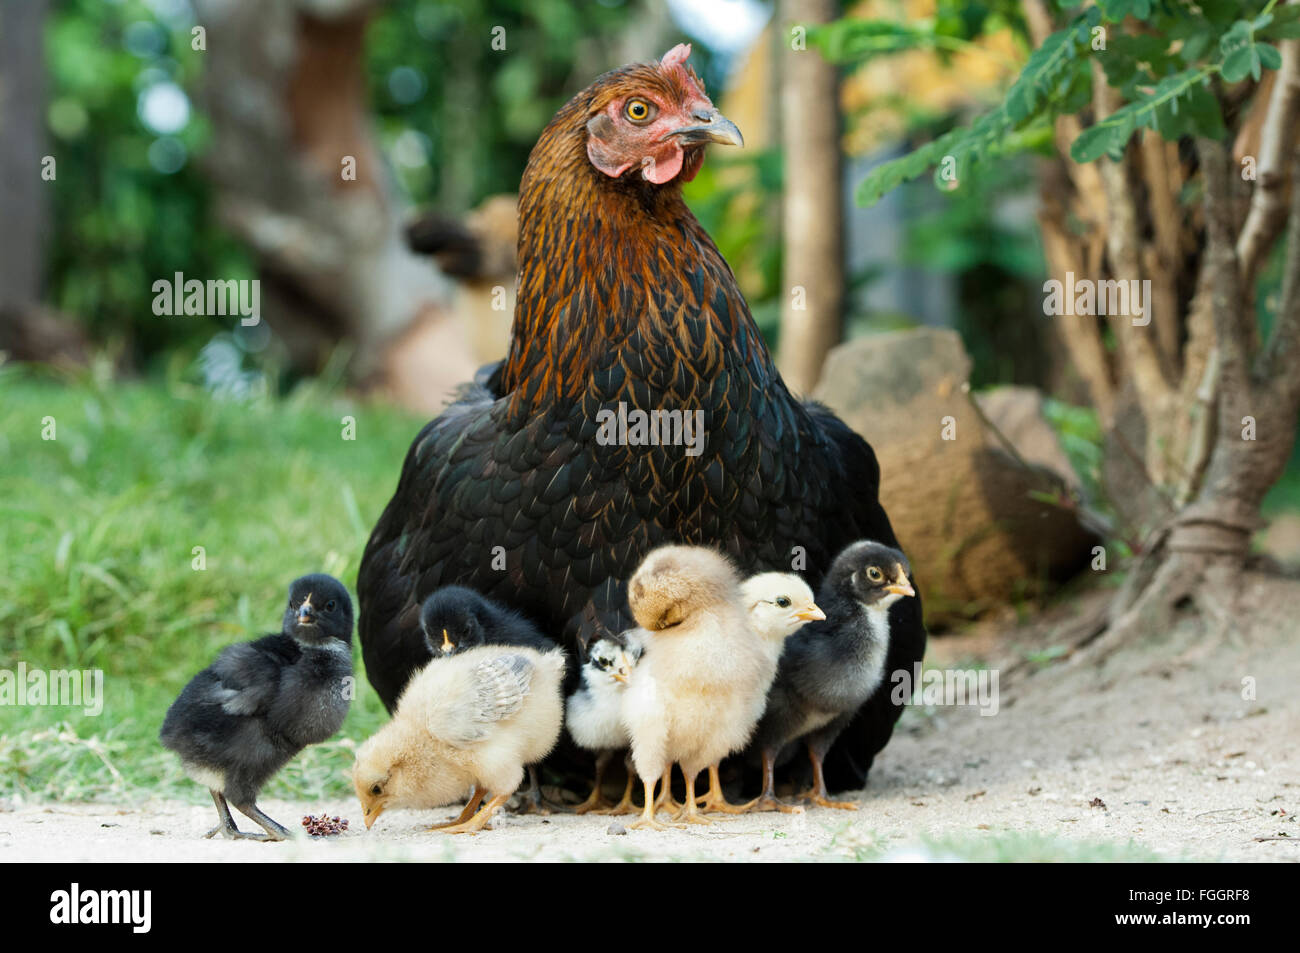 Mother hen with young chicks hiding under her. Uganda. Stock Photo